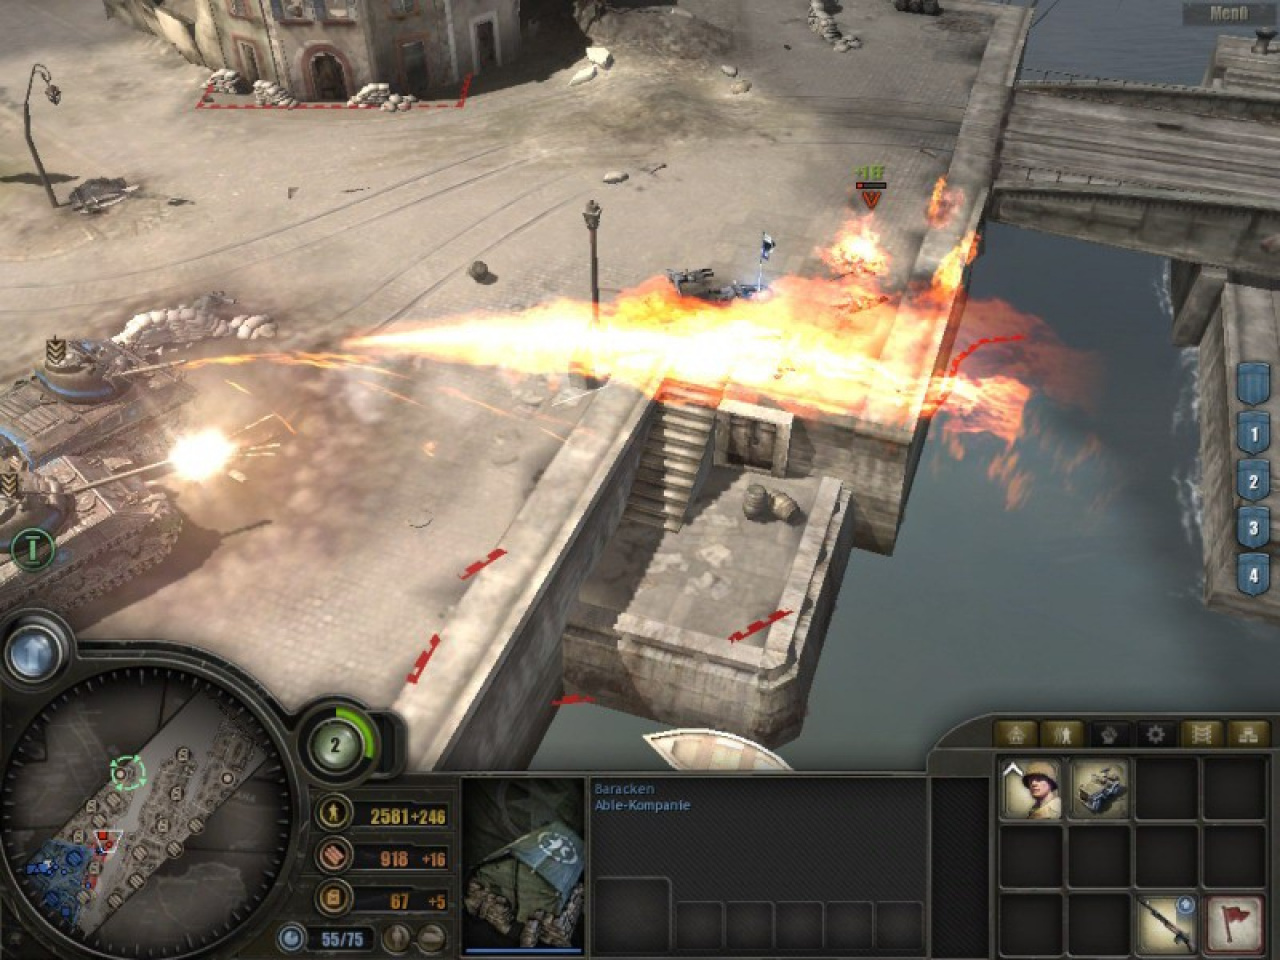 company of heroes 3 ps4